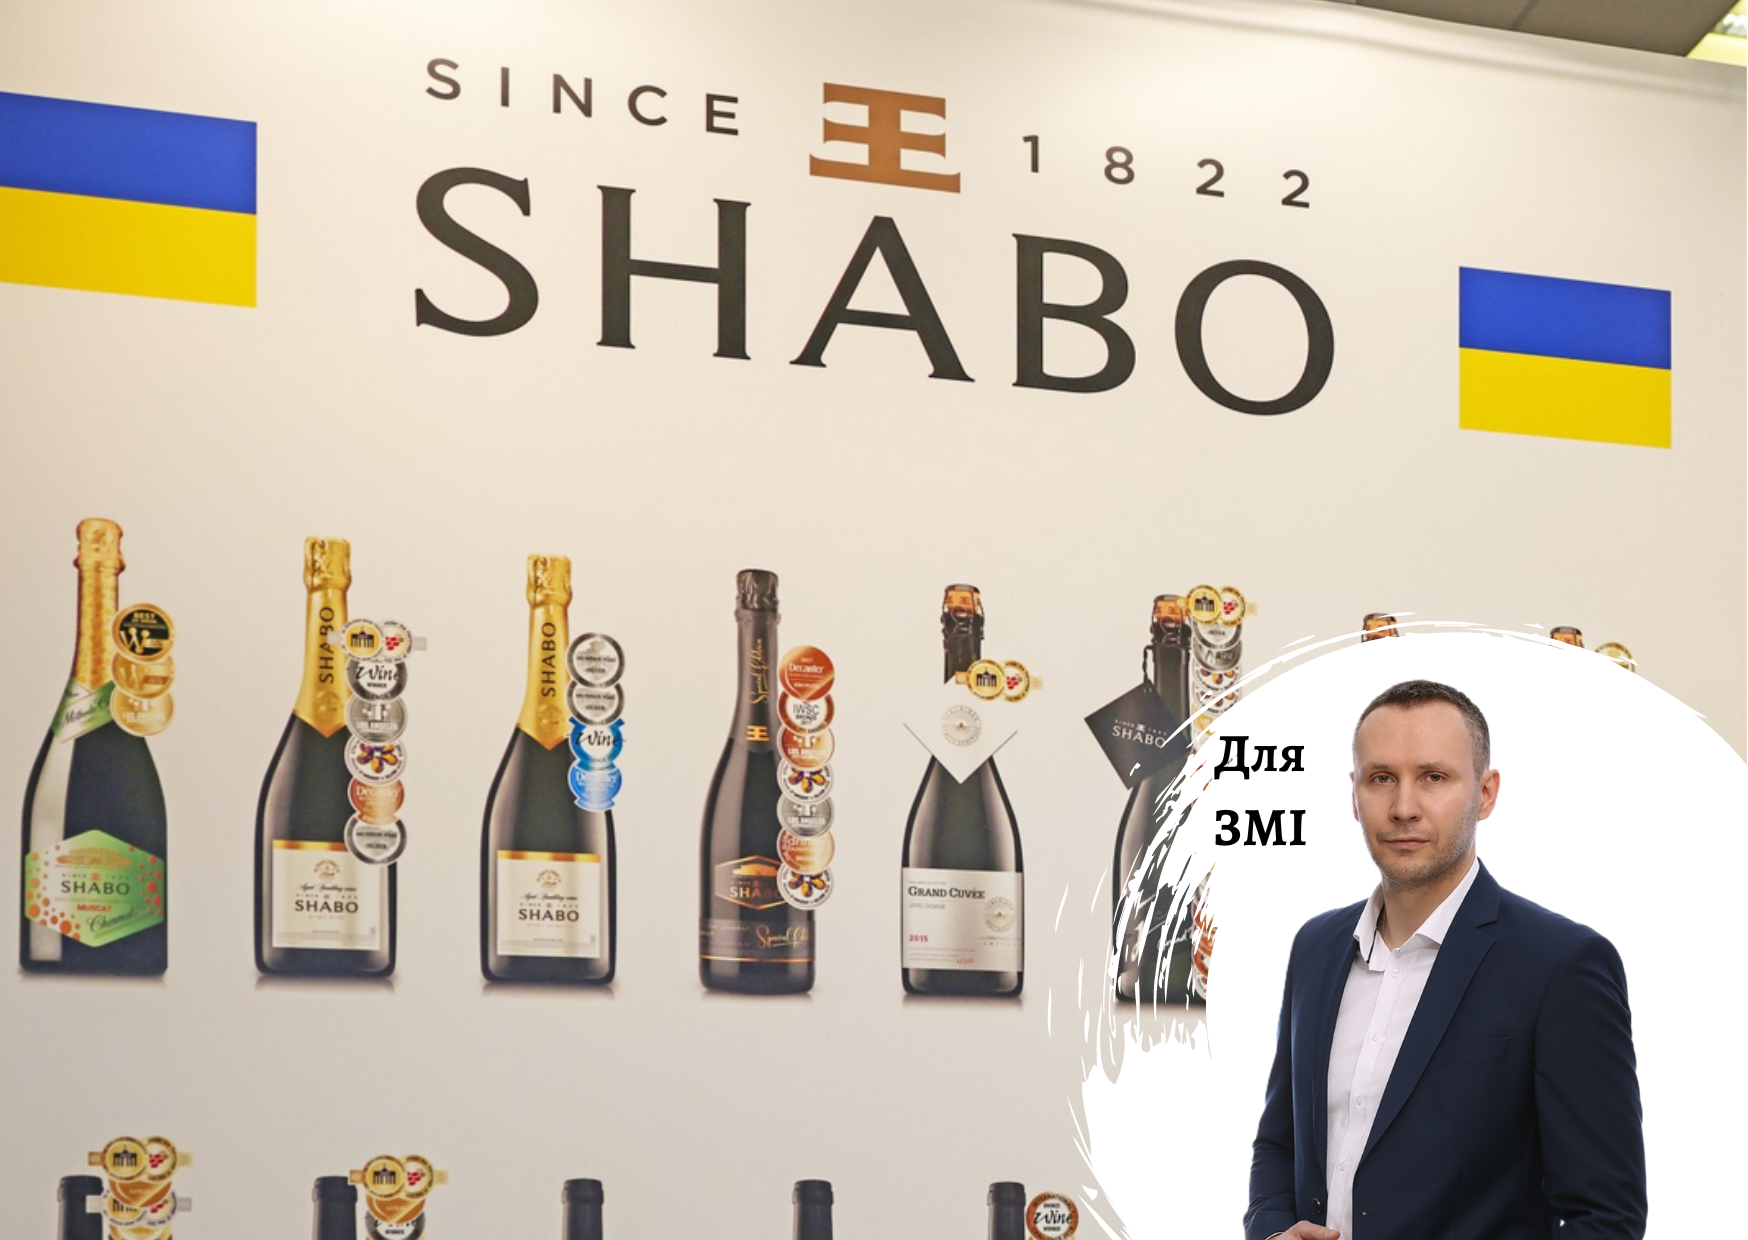 Nemiroff, Global Spirits and Shabo have increased exports by 20-50% - comments by Pro-Consulting CEO Olekasandr Sokolov. FORBES